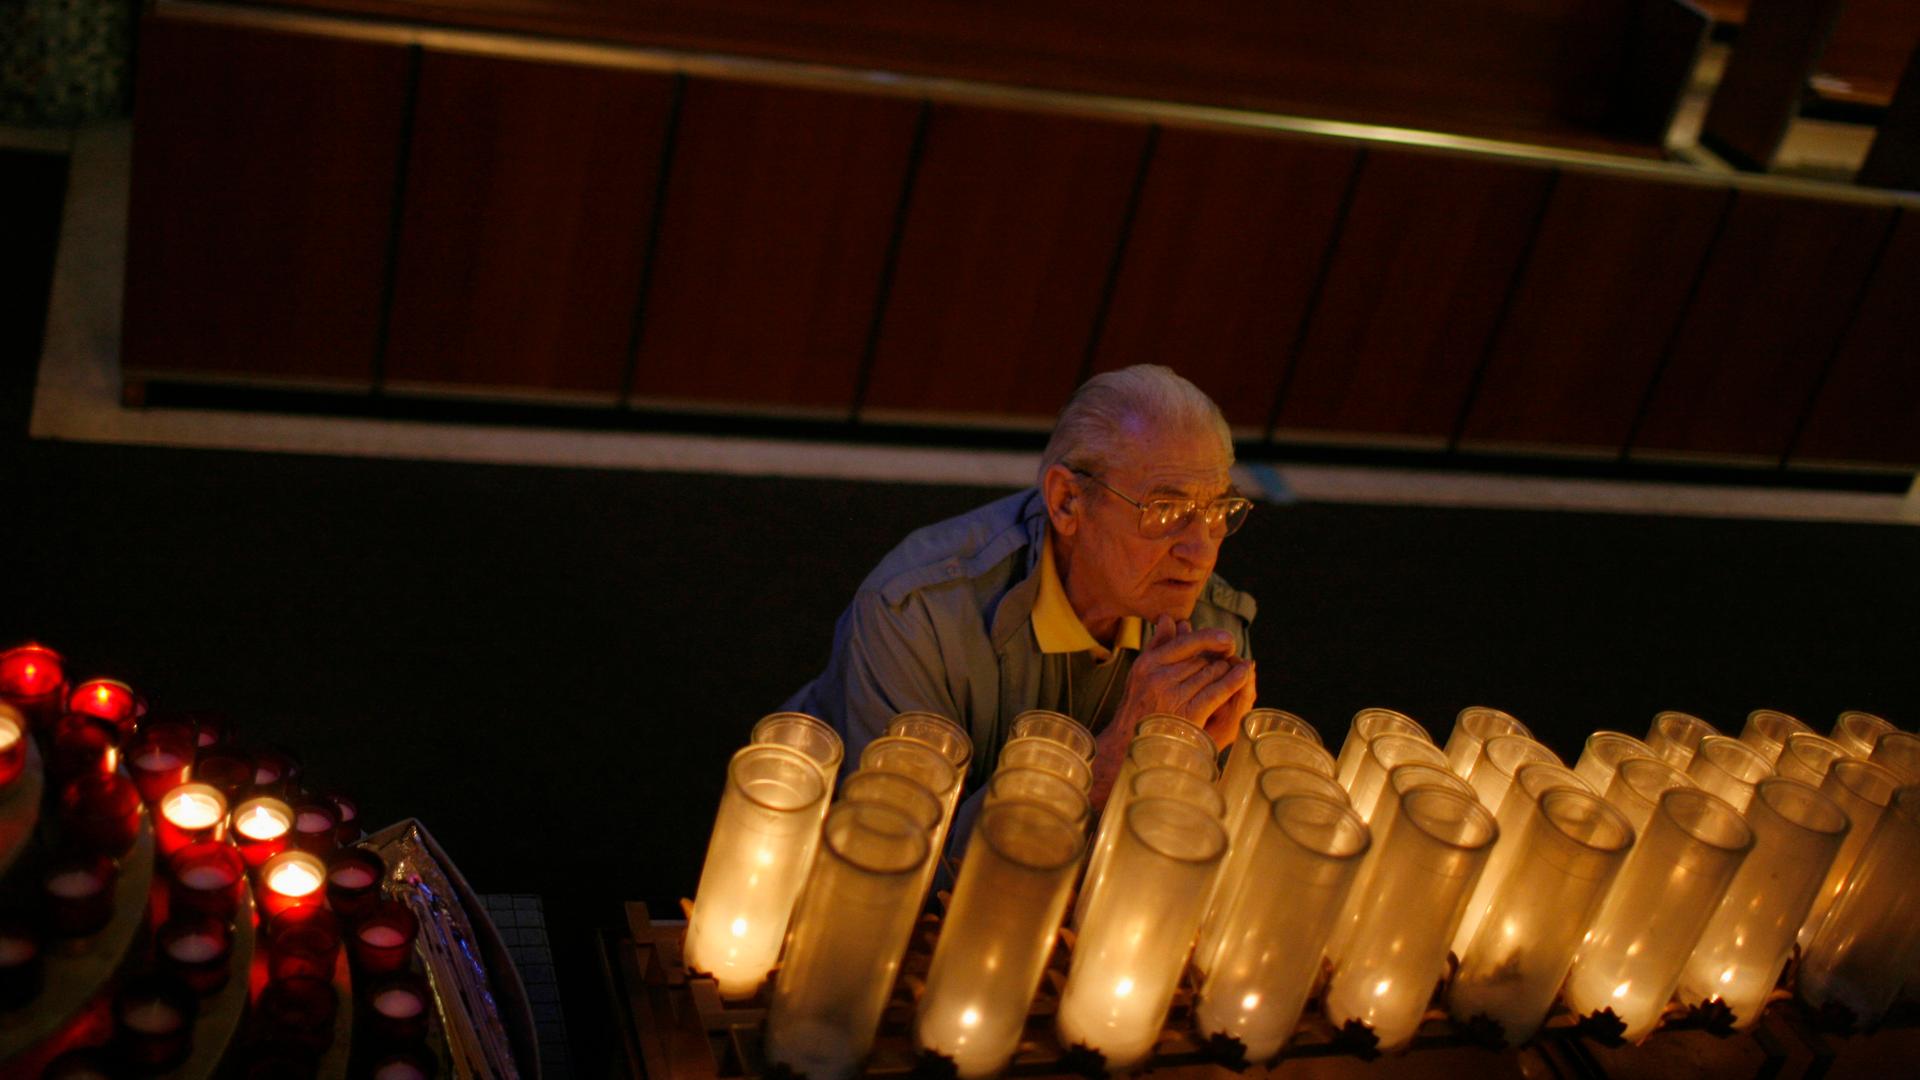 Leo Kurcz, 89, prays at Immaculate Conception Catholic Church in Chicago, Illinois  on April 10, 2008. Hispanics still make up the majority of Catholics in the US. But a new national survey from the Pew Research Center reveals that the Catholic share of H